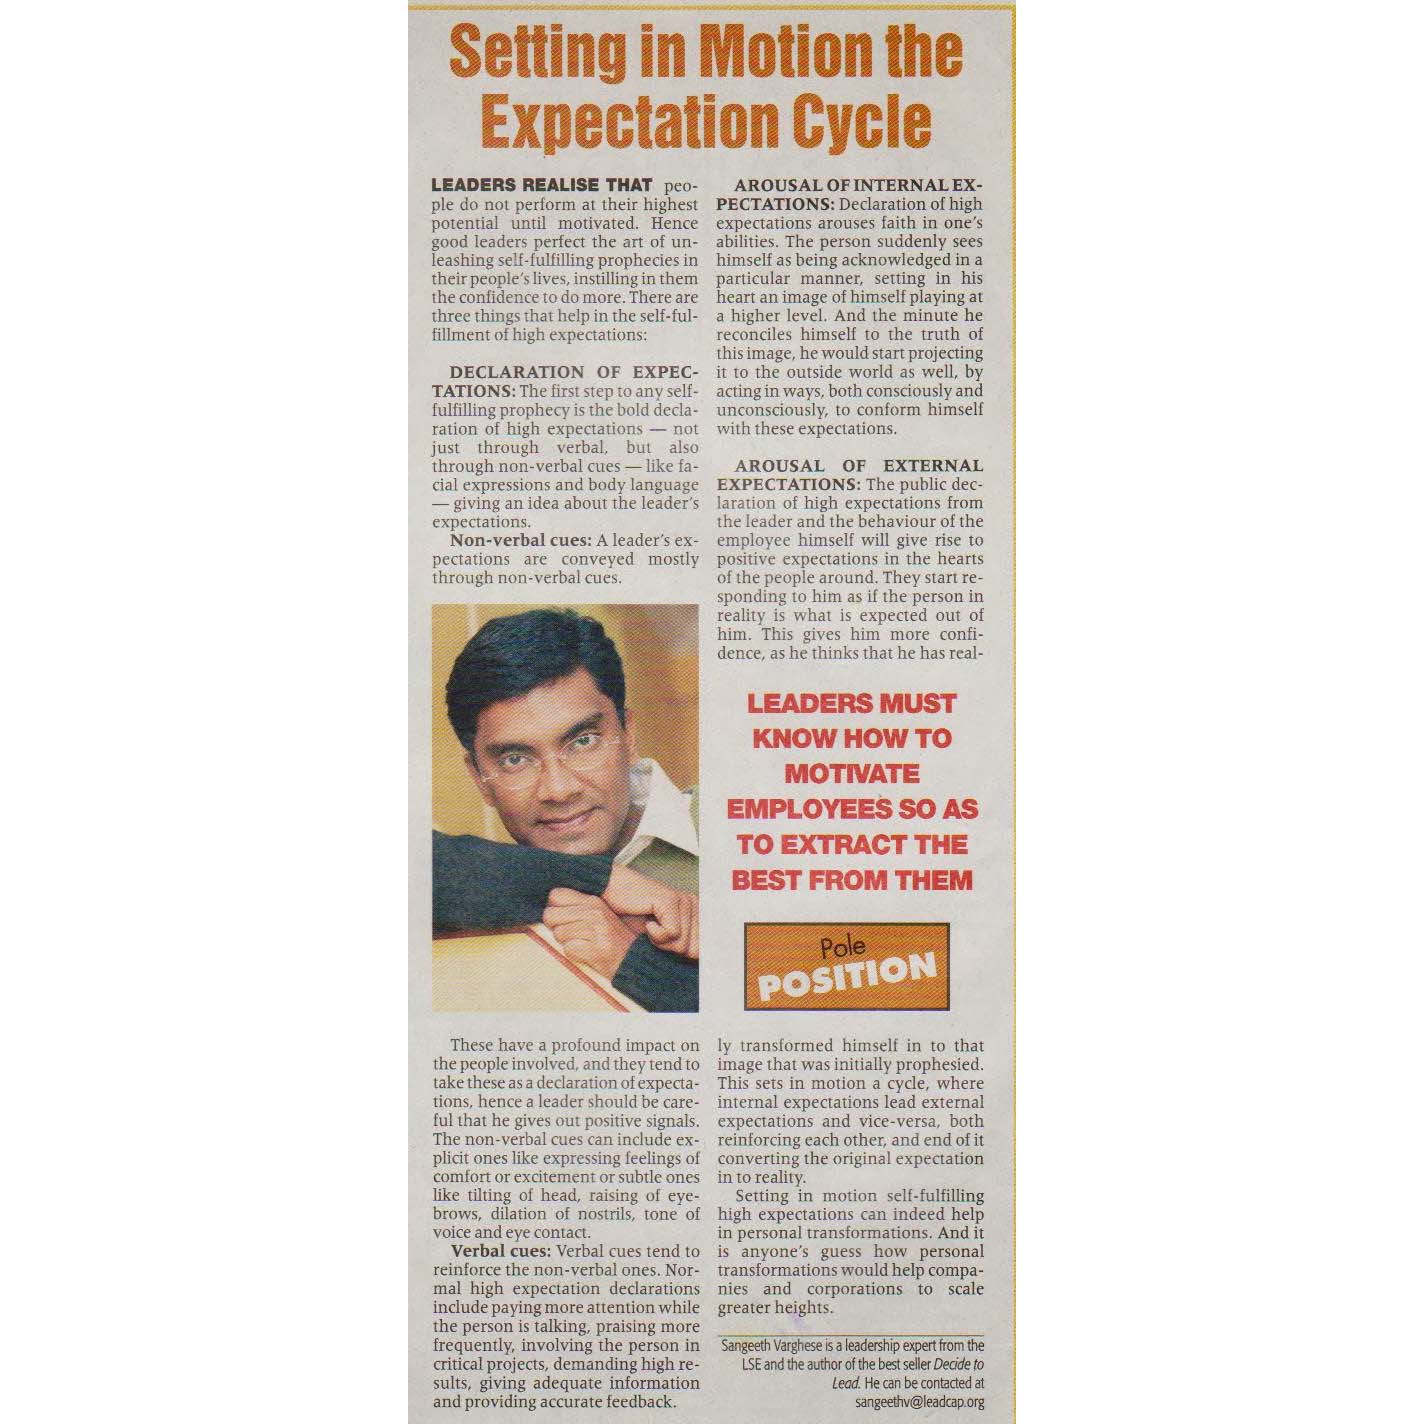 The Economic Times 3 October 2008